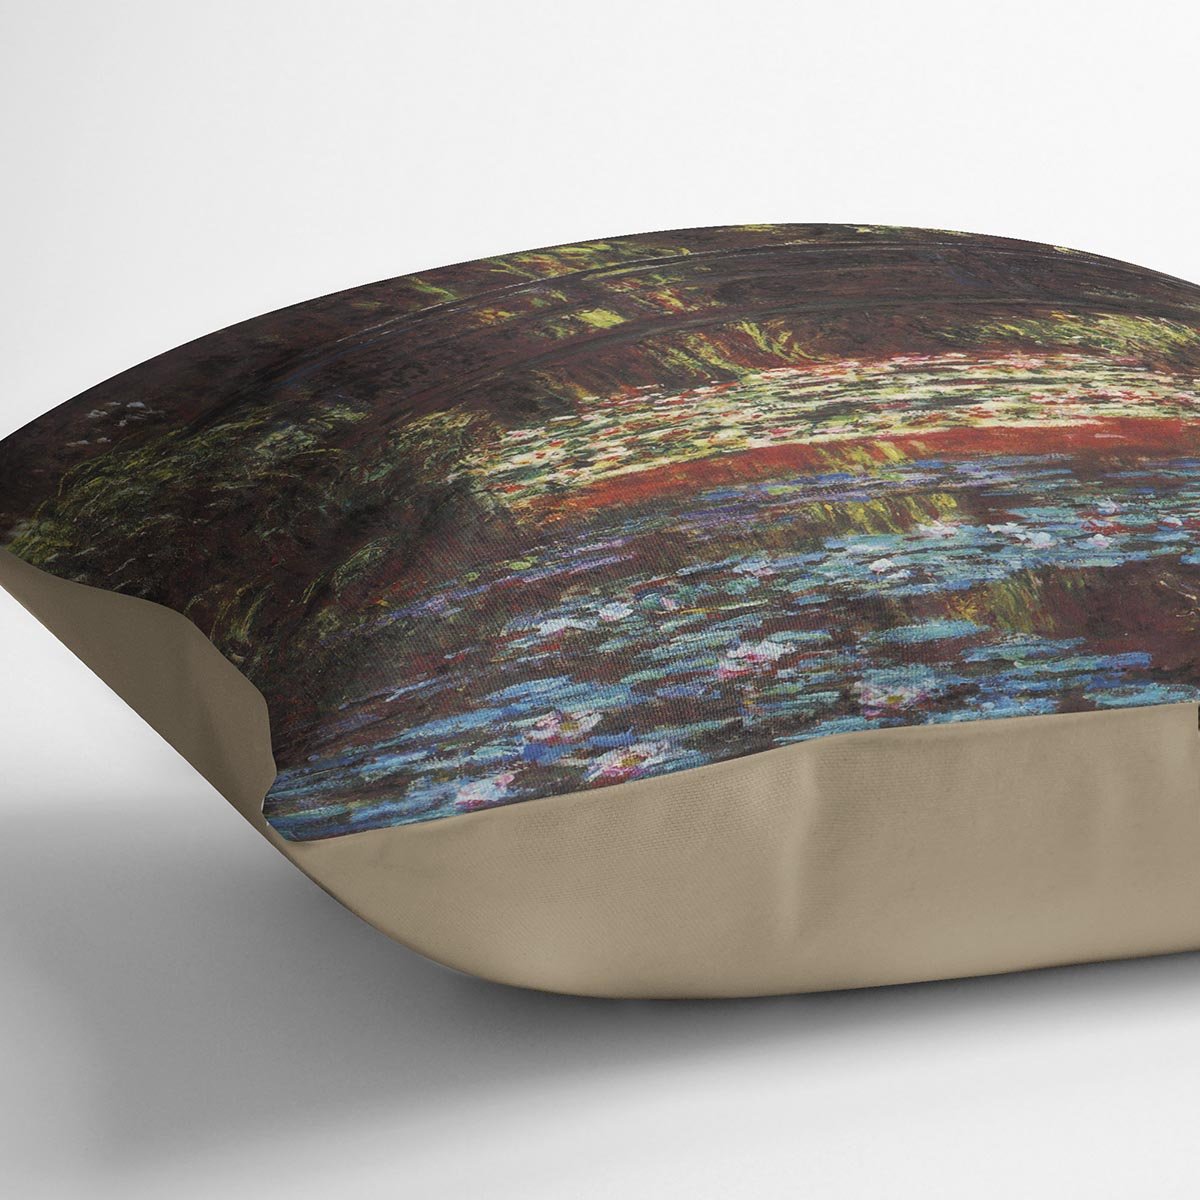 Water Lily Pond 1 by Monet Throw Pillow